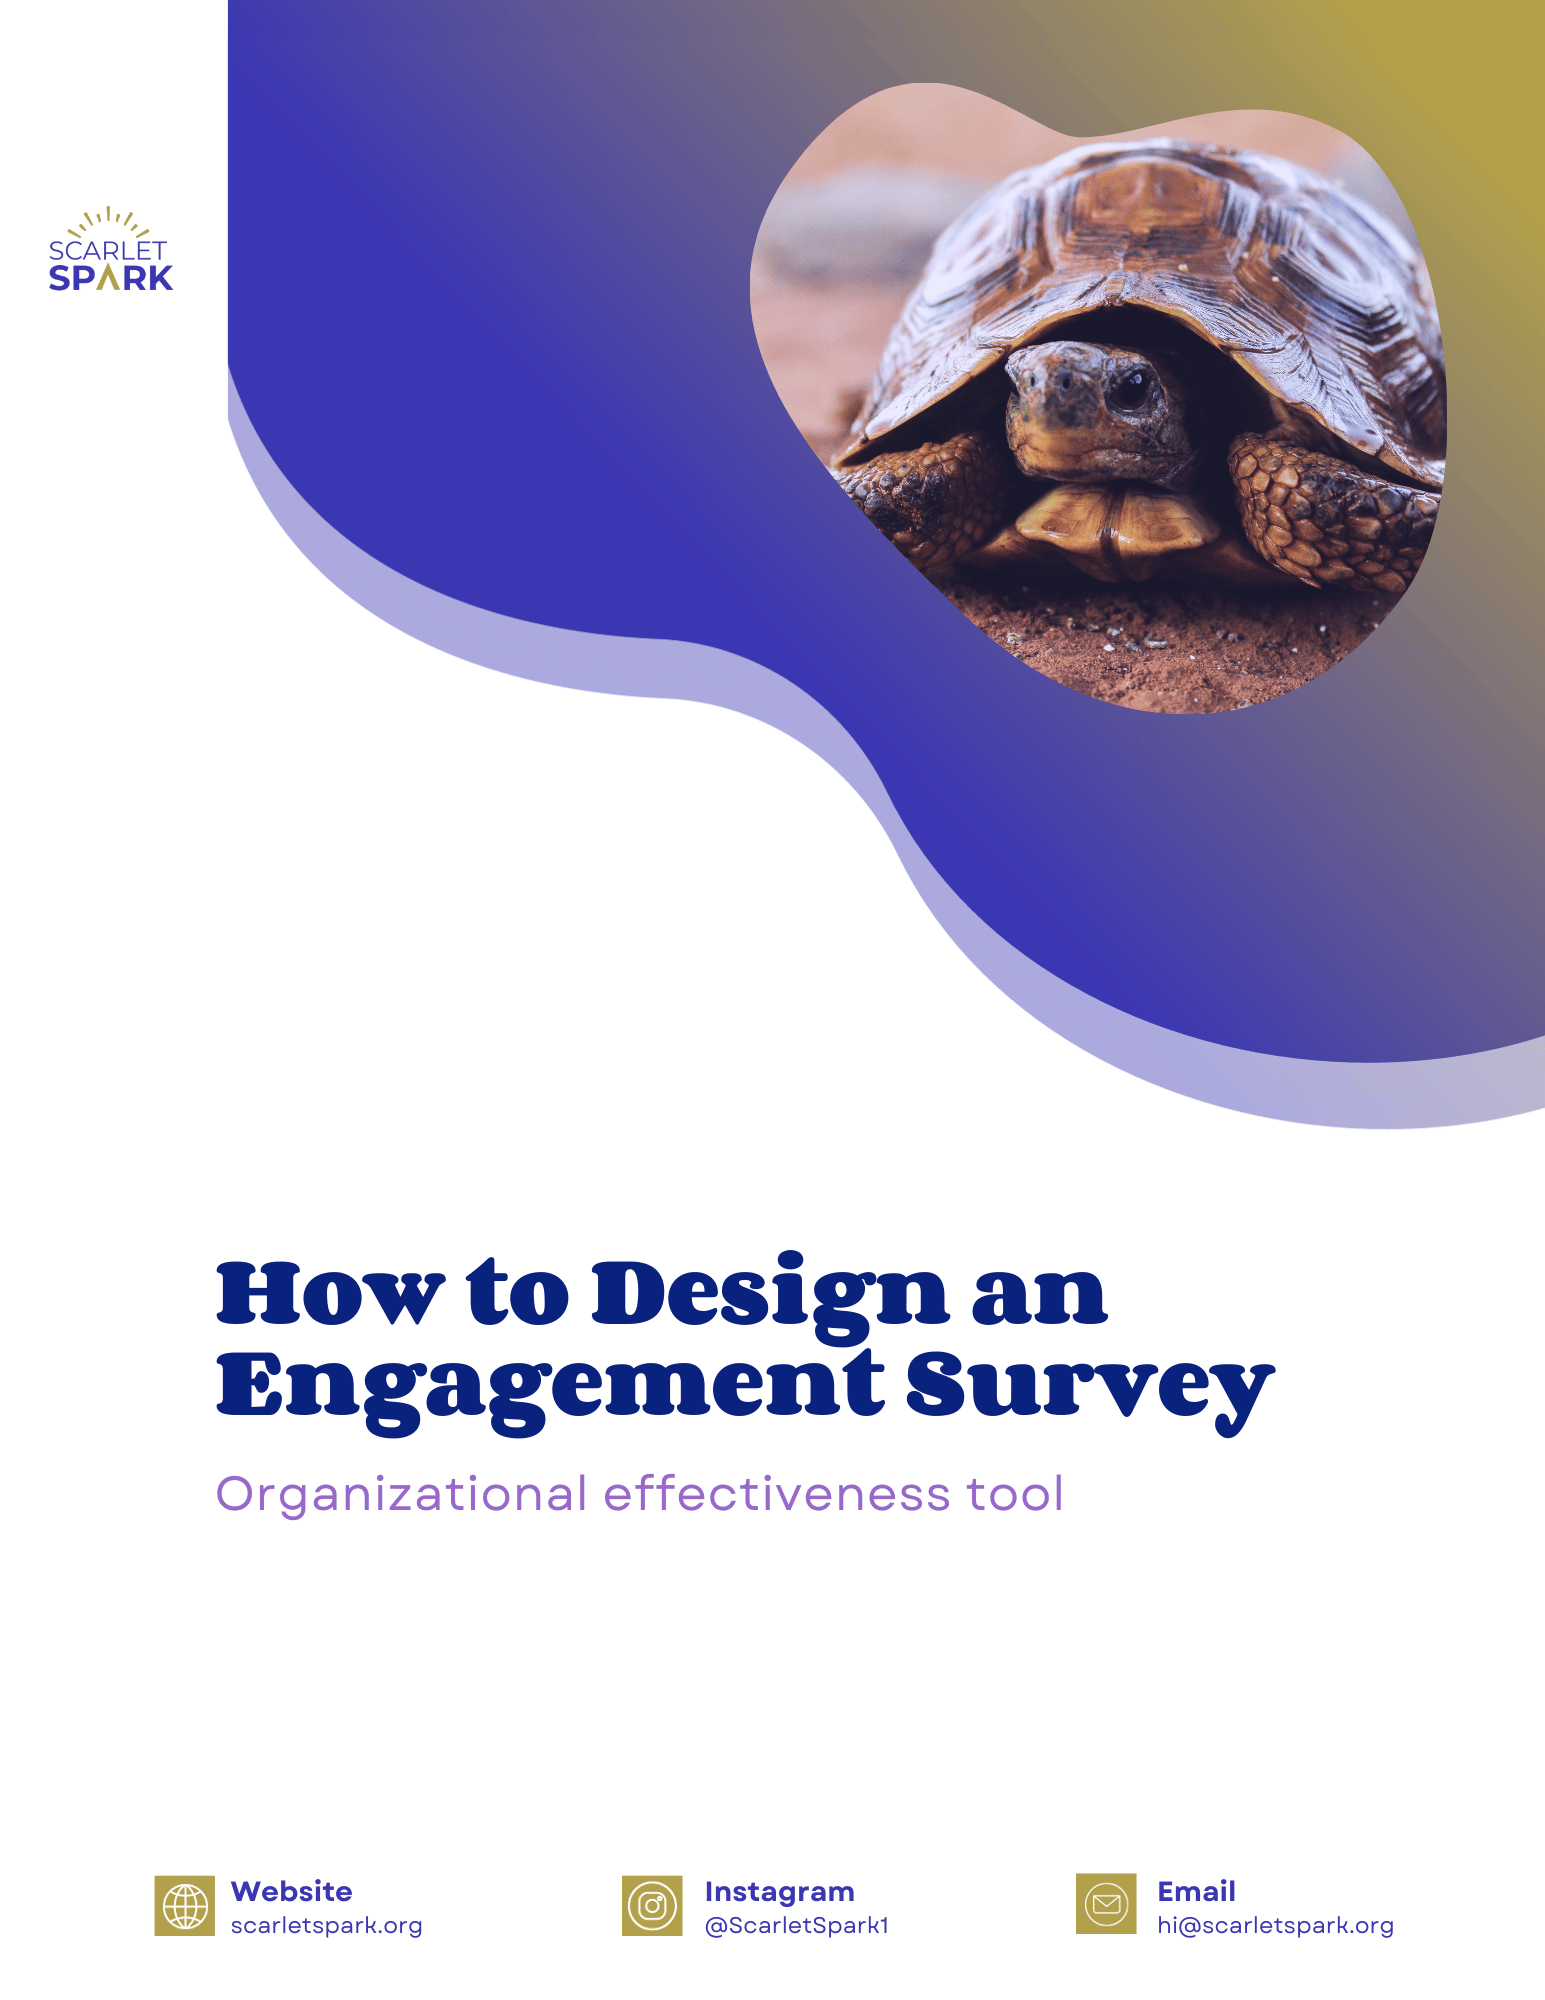 How to Design an Engagement Survey